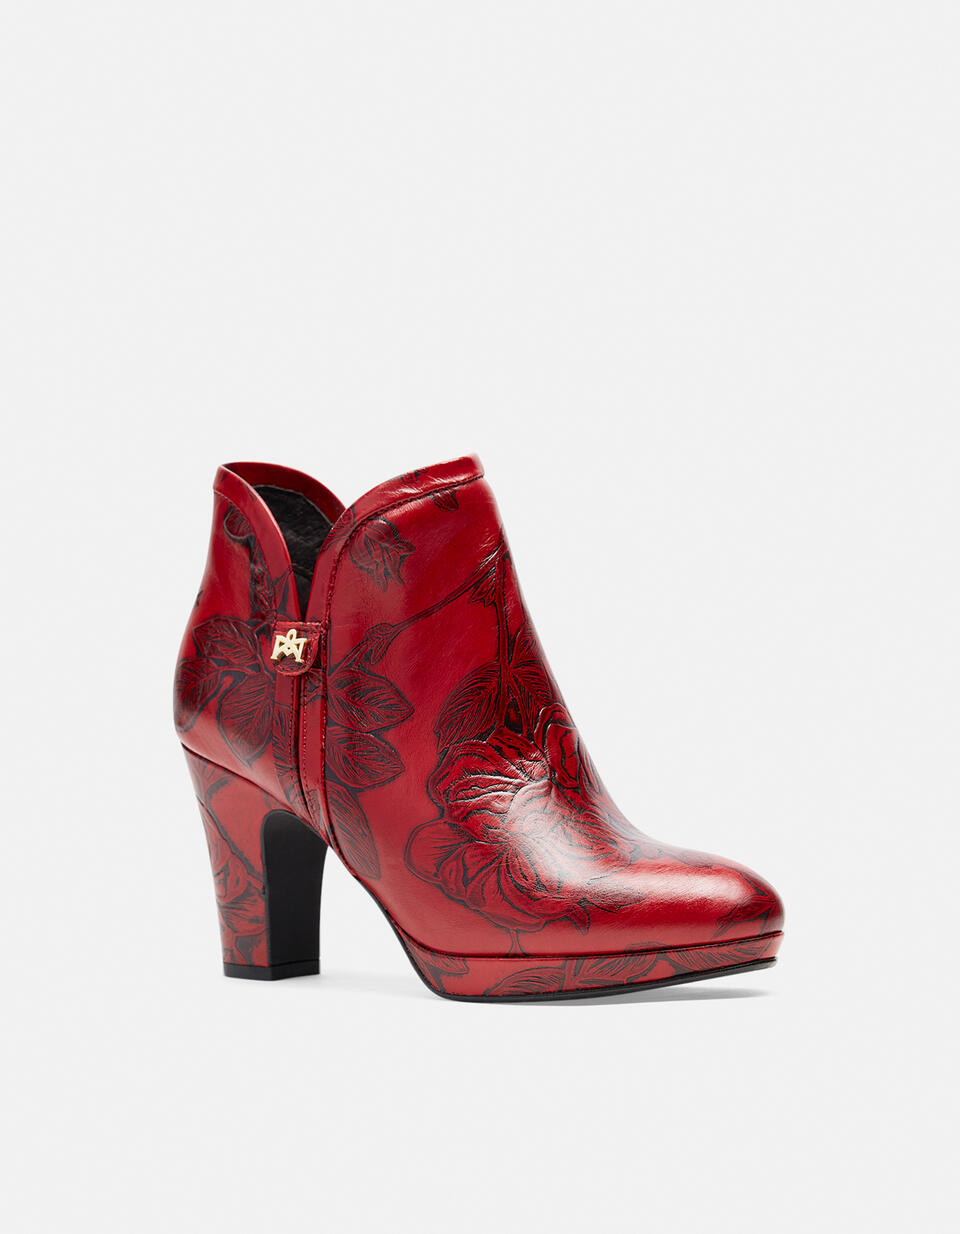 Mimi ankle boots ROSSO  - Women Shoes - Shoes - Cuoieria Fiorentina